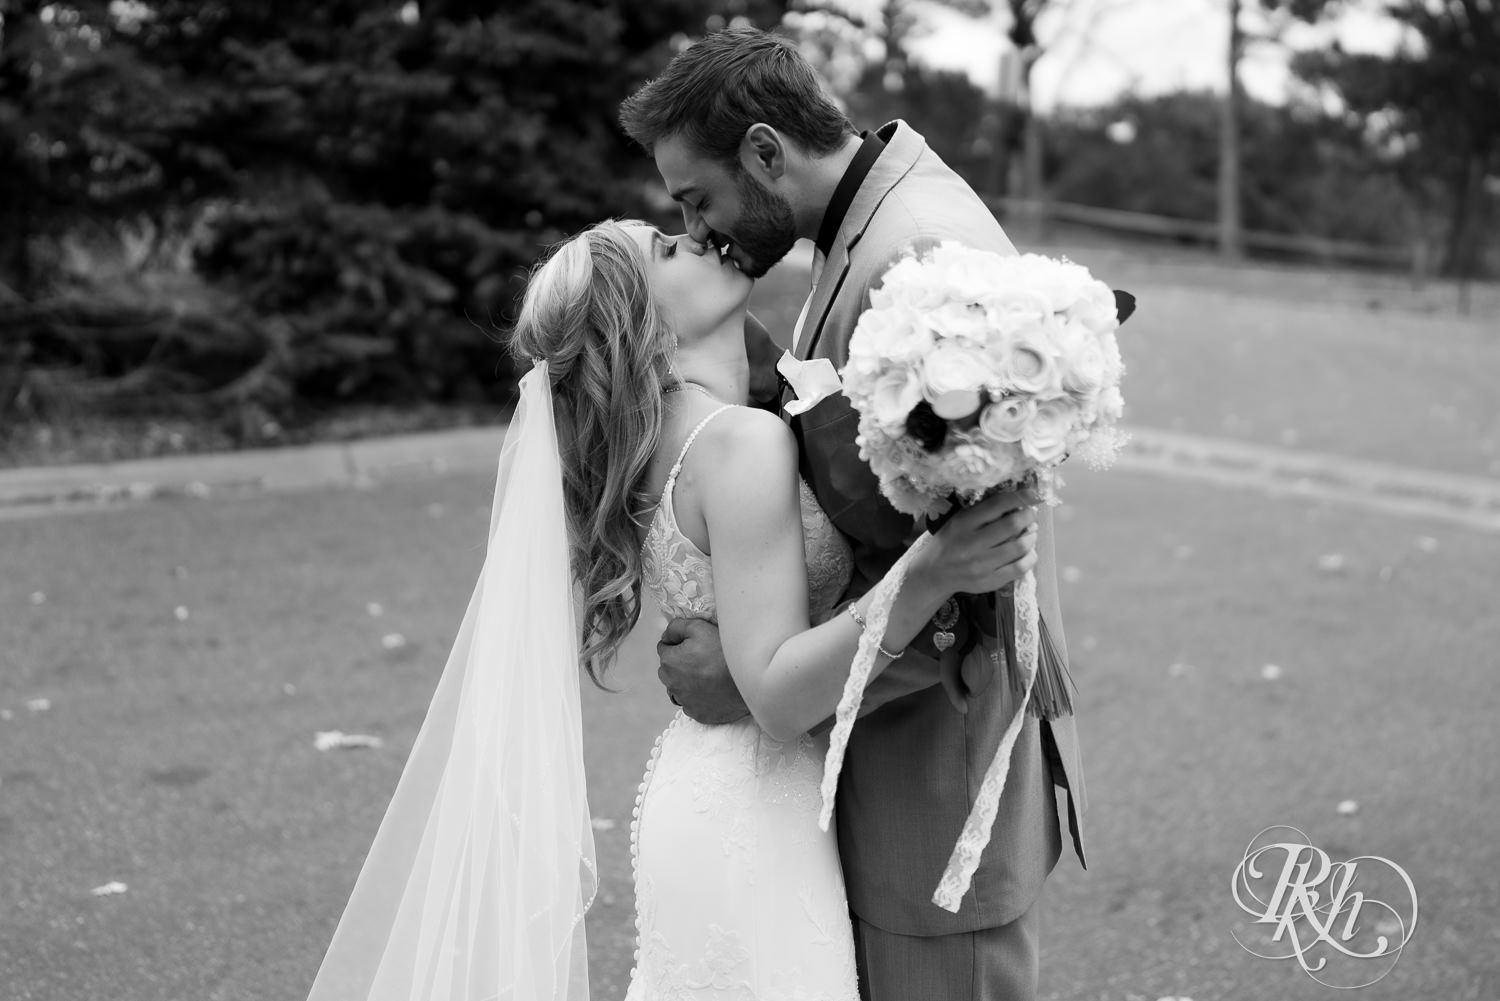 Bride and groom kiss after wedding ceremony at Bunker Hills Event Center in Coon Rapids, Minnesota.